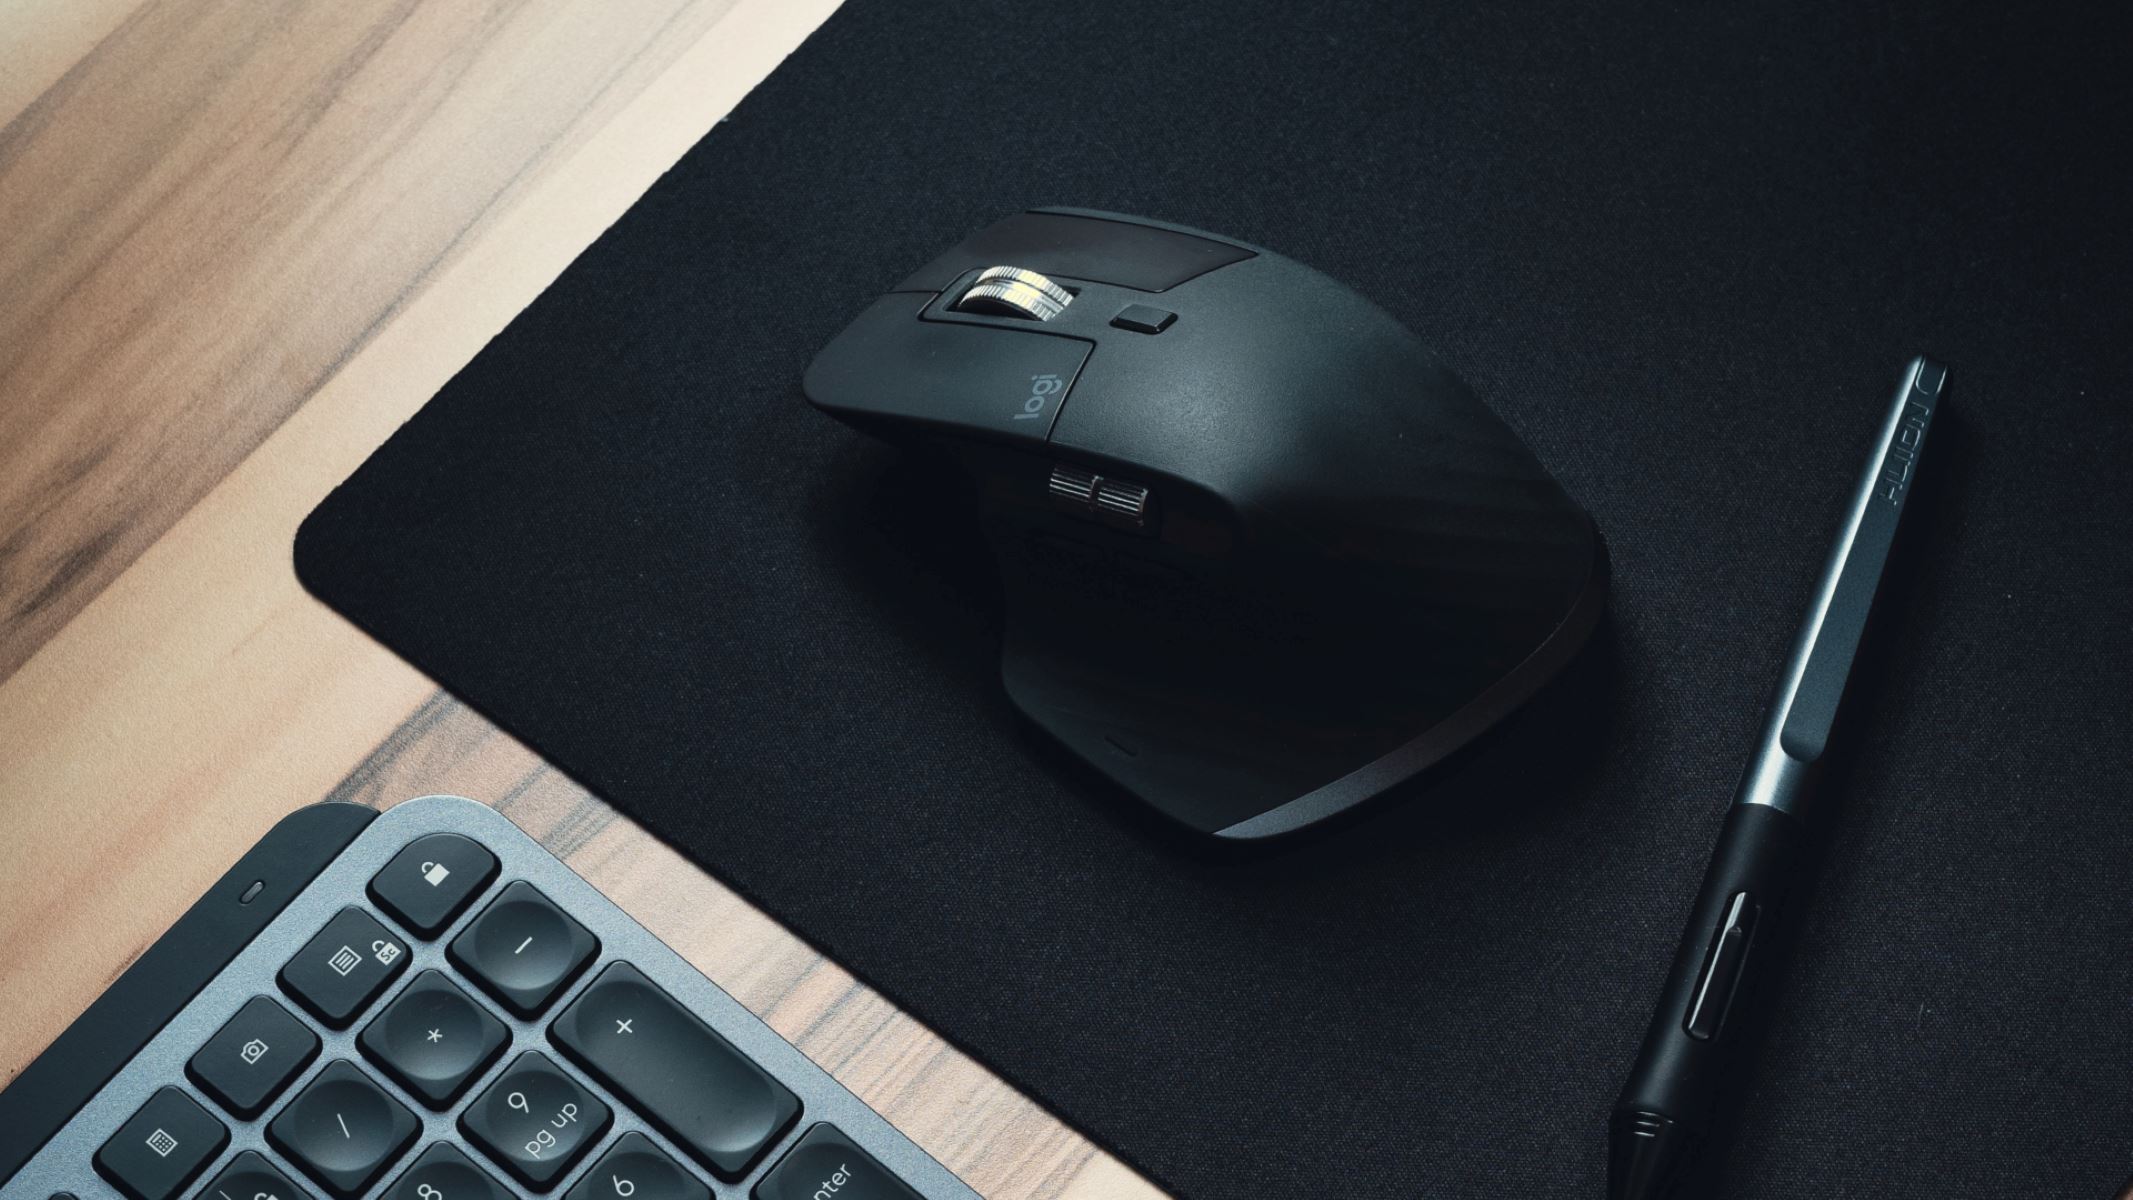 Top Reasons Your Mouse Cursor Slows Down - Is Your Mouse Outdated?